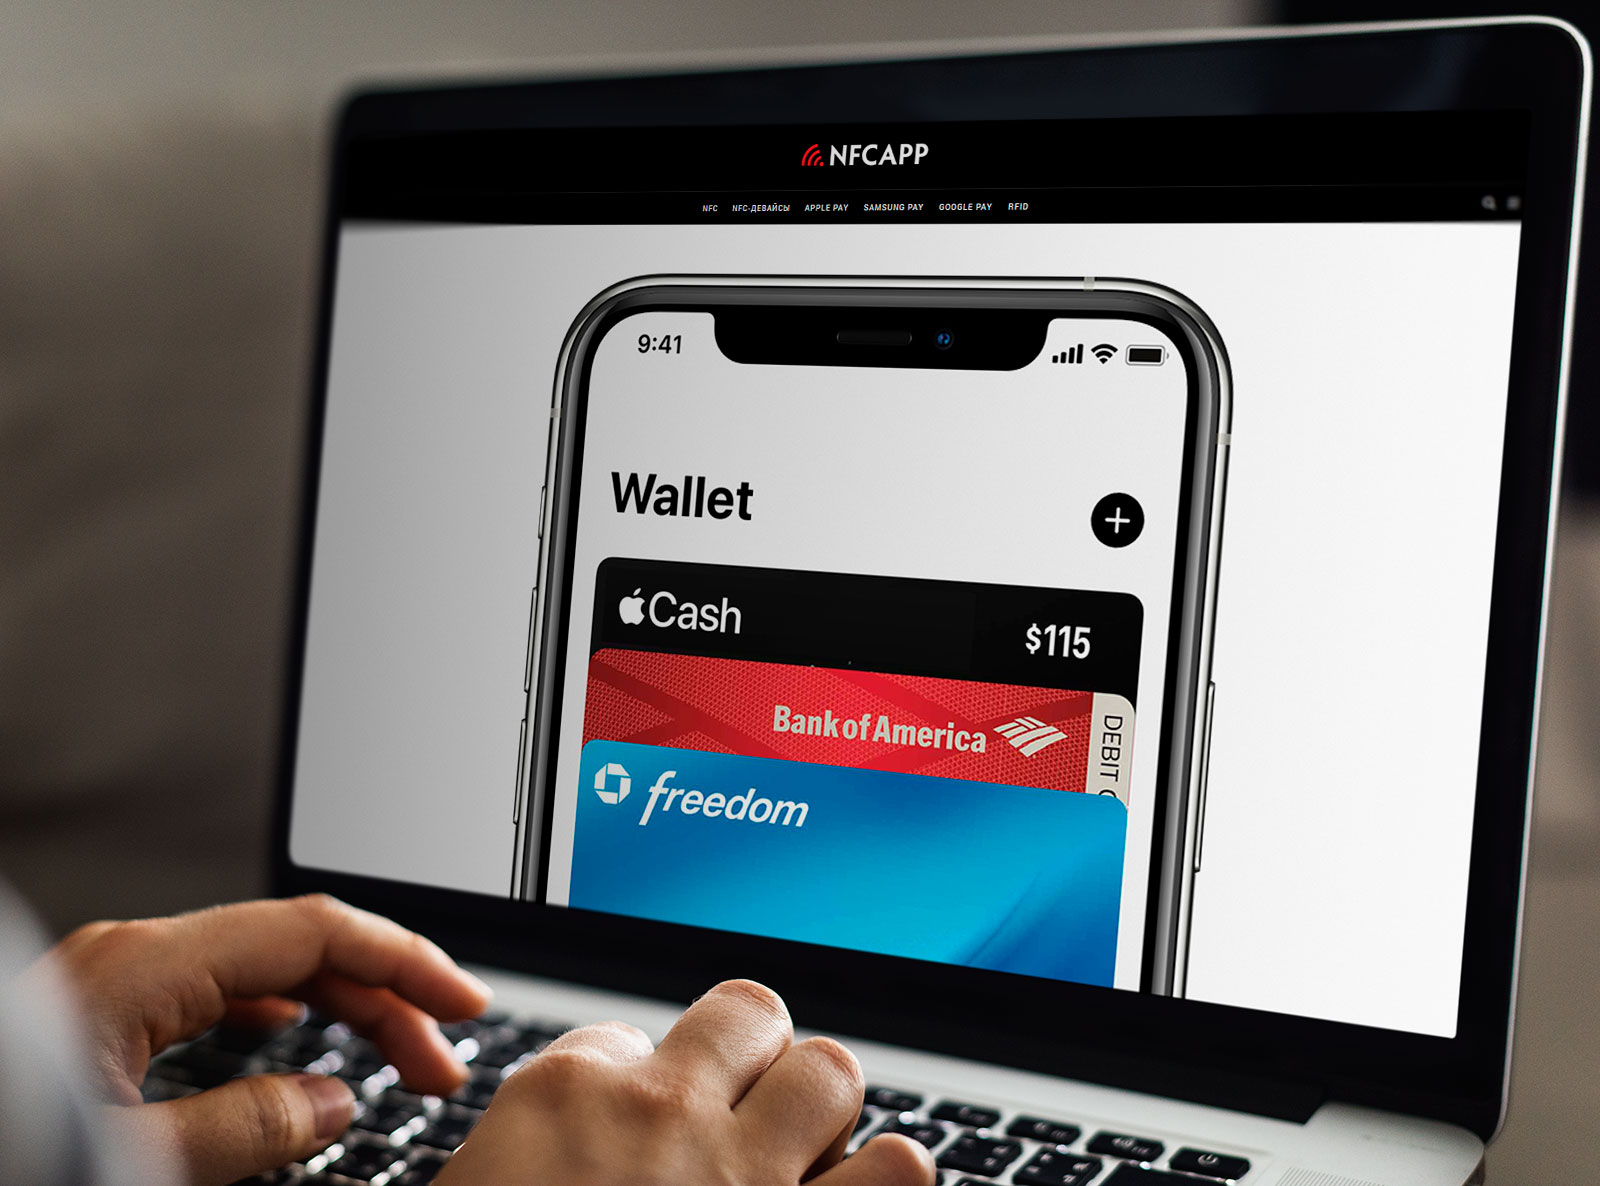 List Of Loyalty Cards For Apple Wallet